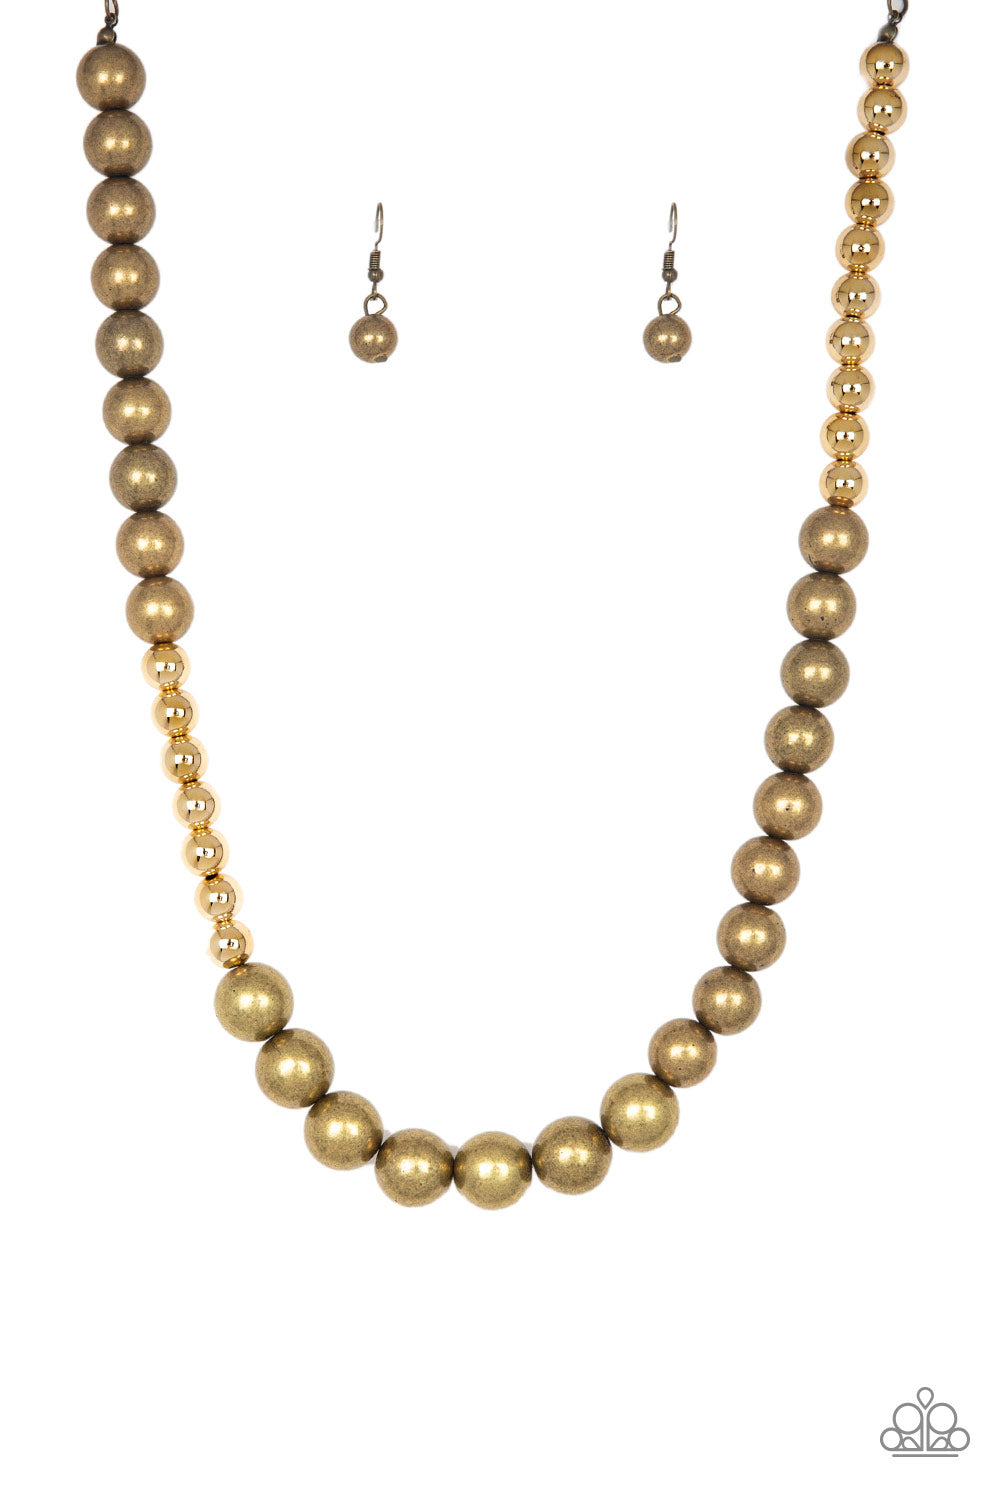 Paparazzi Power To The People Brass Short Necklace - P2ED-BRXX-083XX